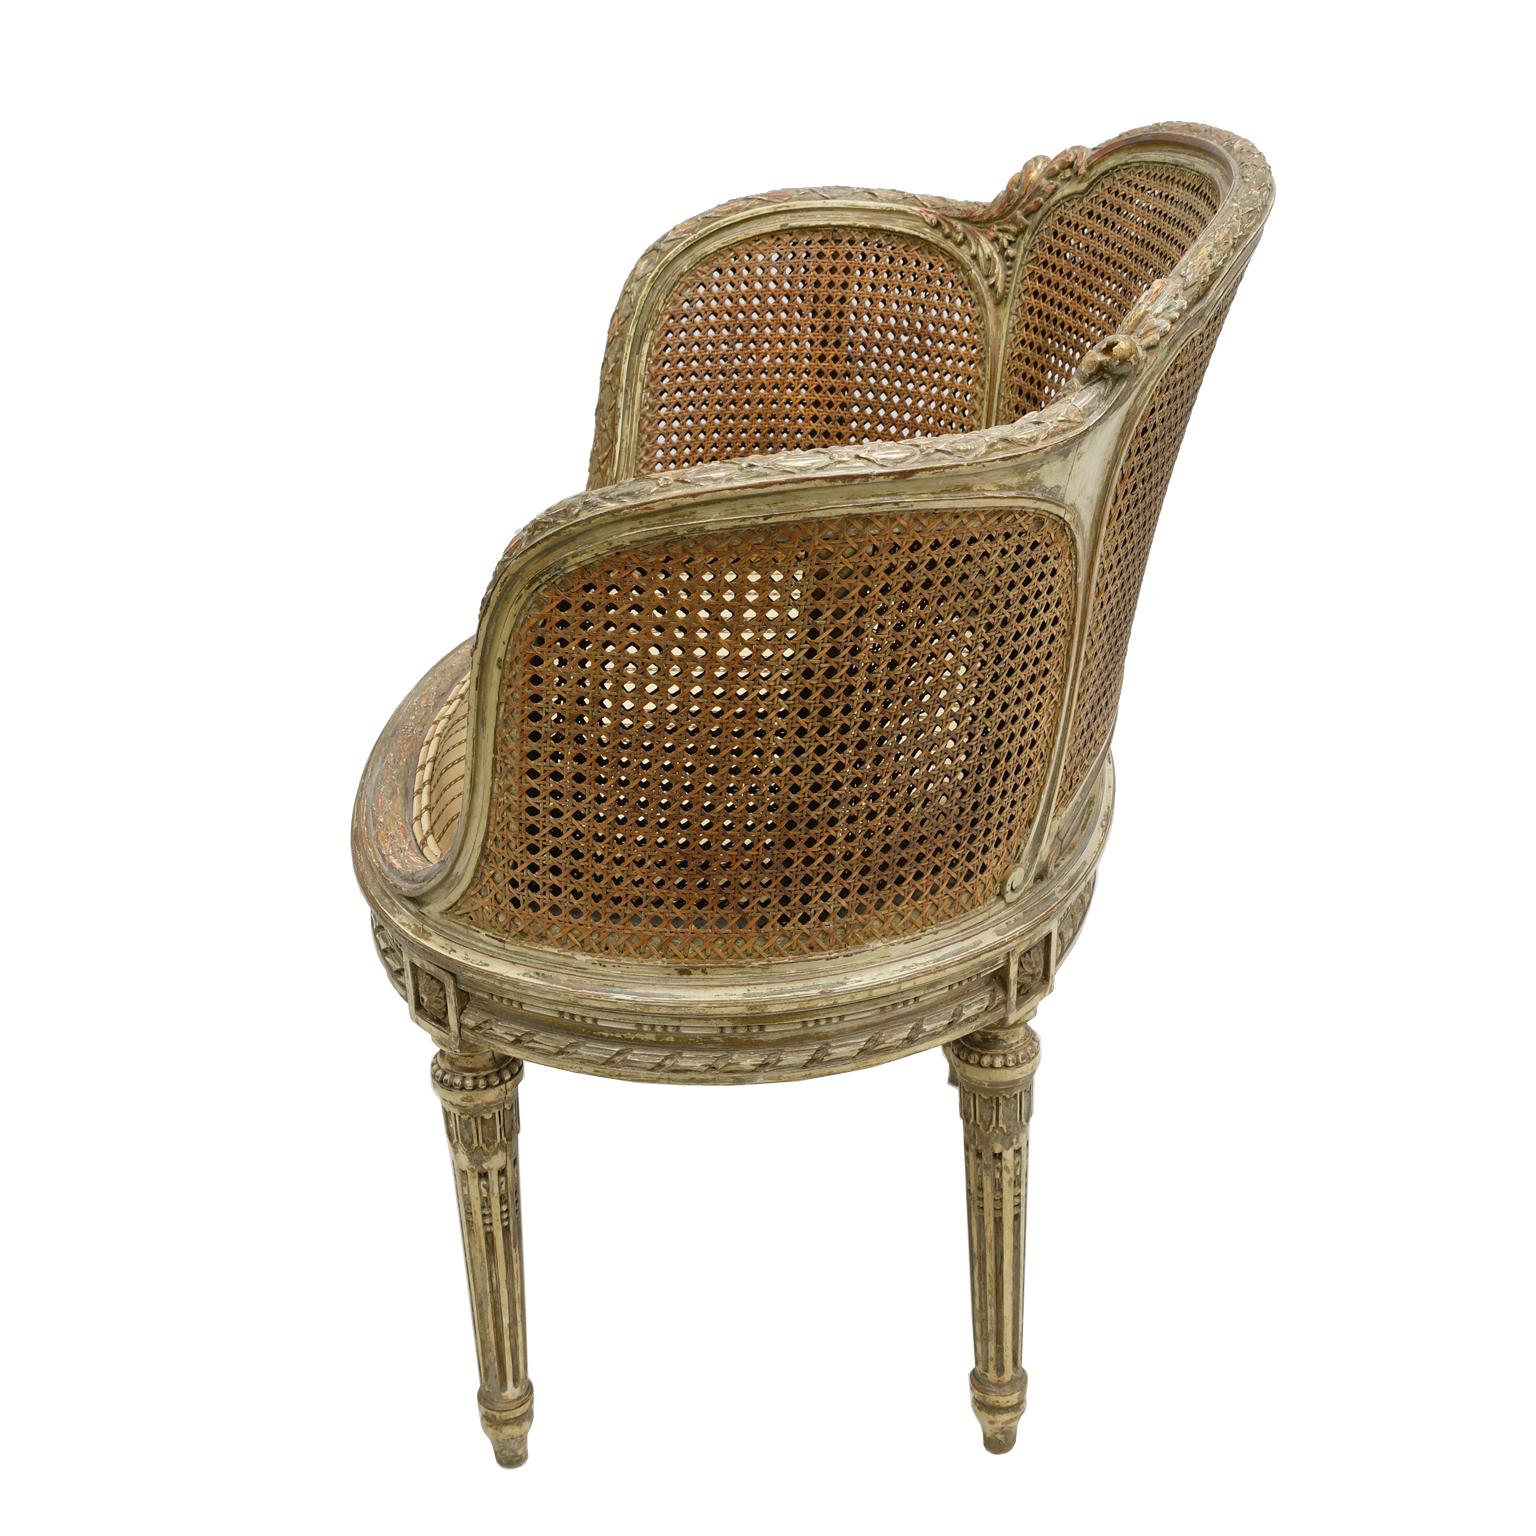 Carved Antique French Louis XVI Style Polychrome and Gilt Barrel Desk Chair with Caning